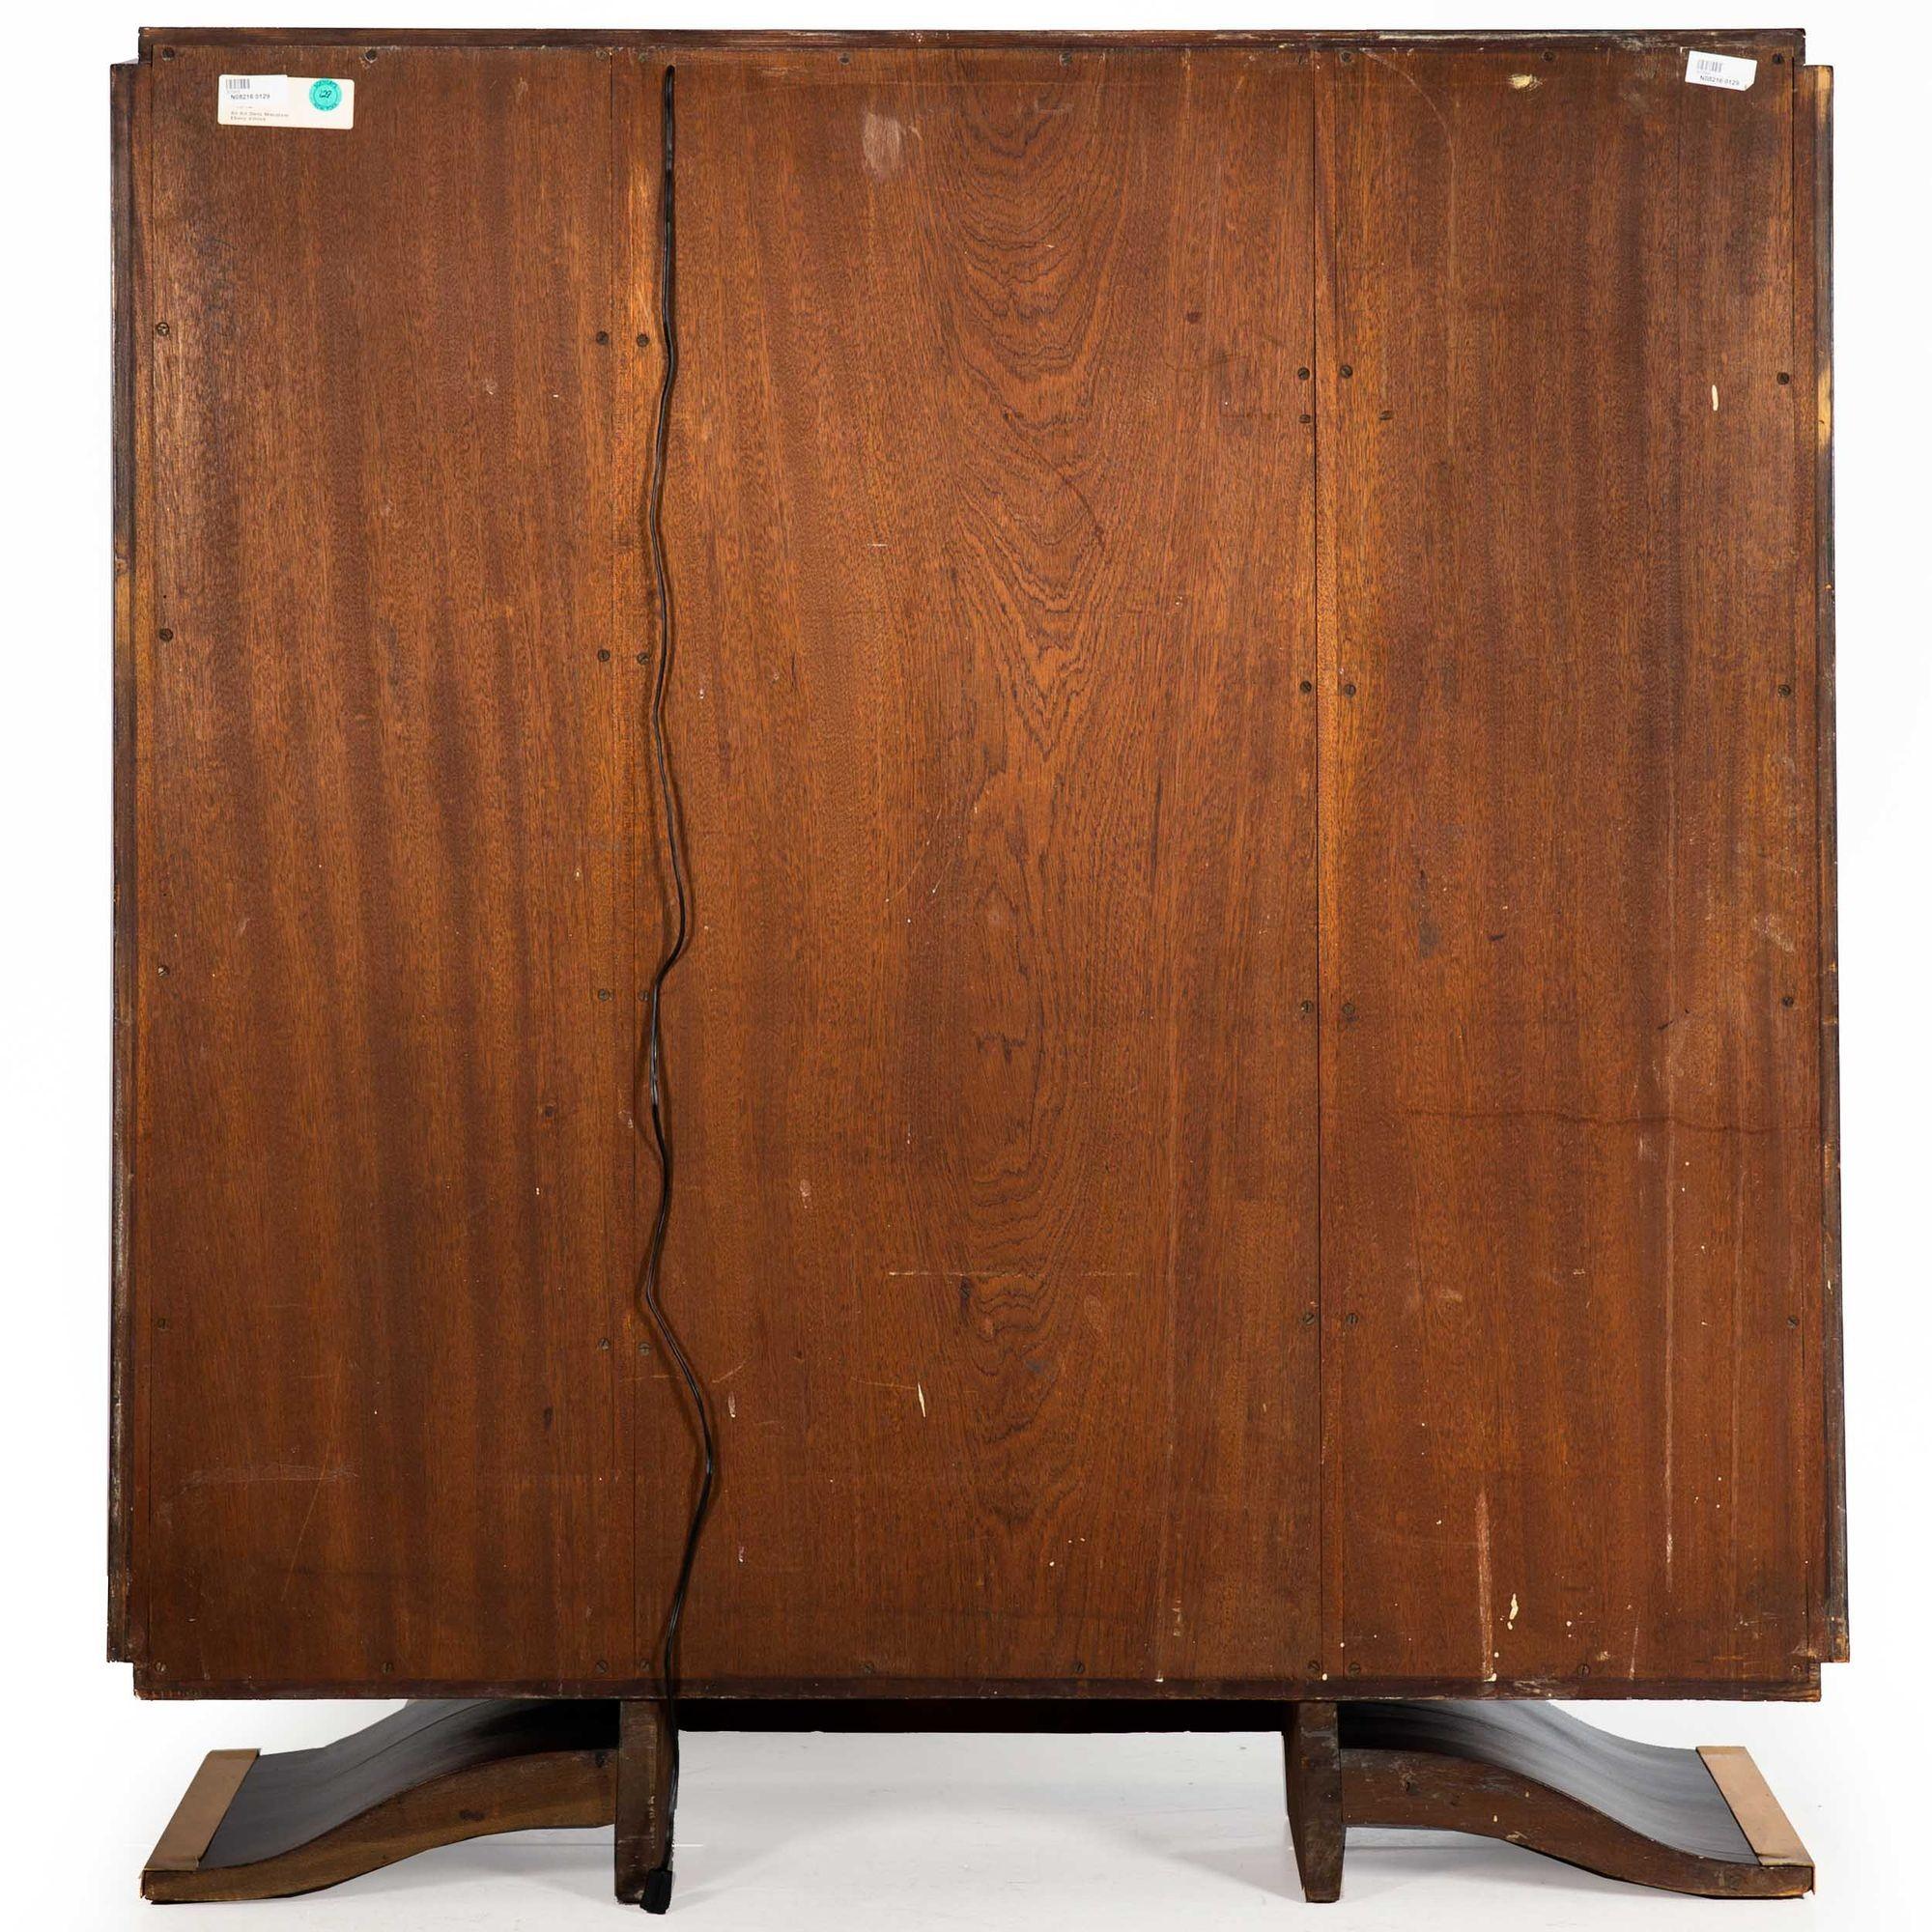 Fine Art Deco Macassar Ebony Vitrine Display Cabinet by Gouffé ca. 1930 In Good Condition For Sale In Shippensburg, PA